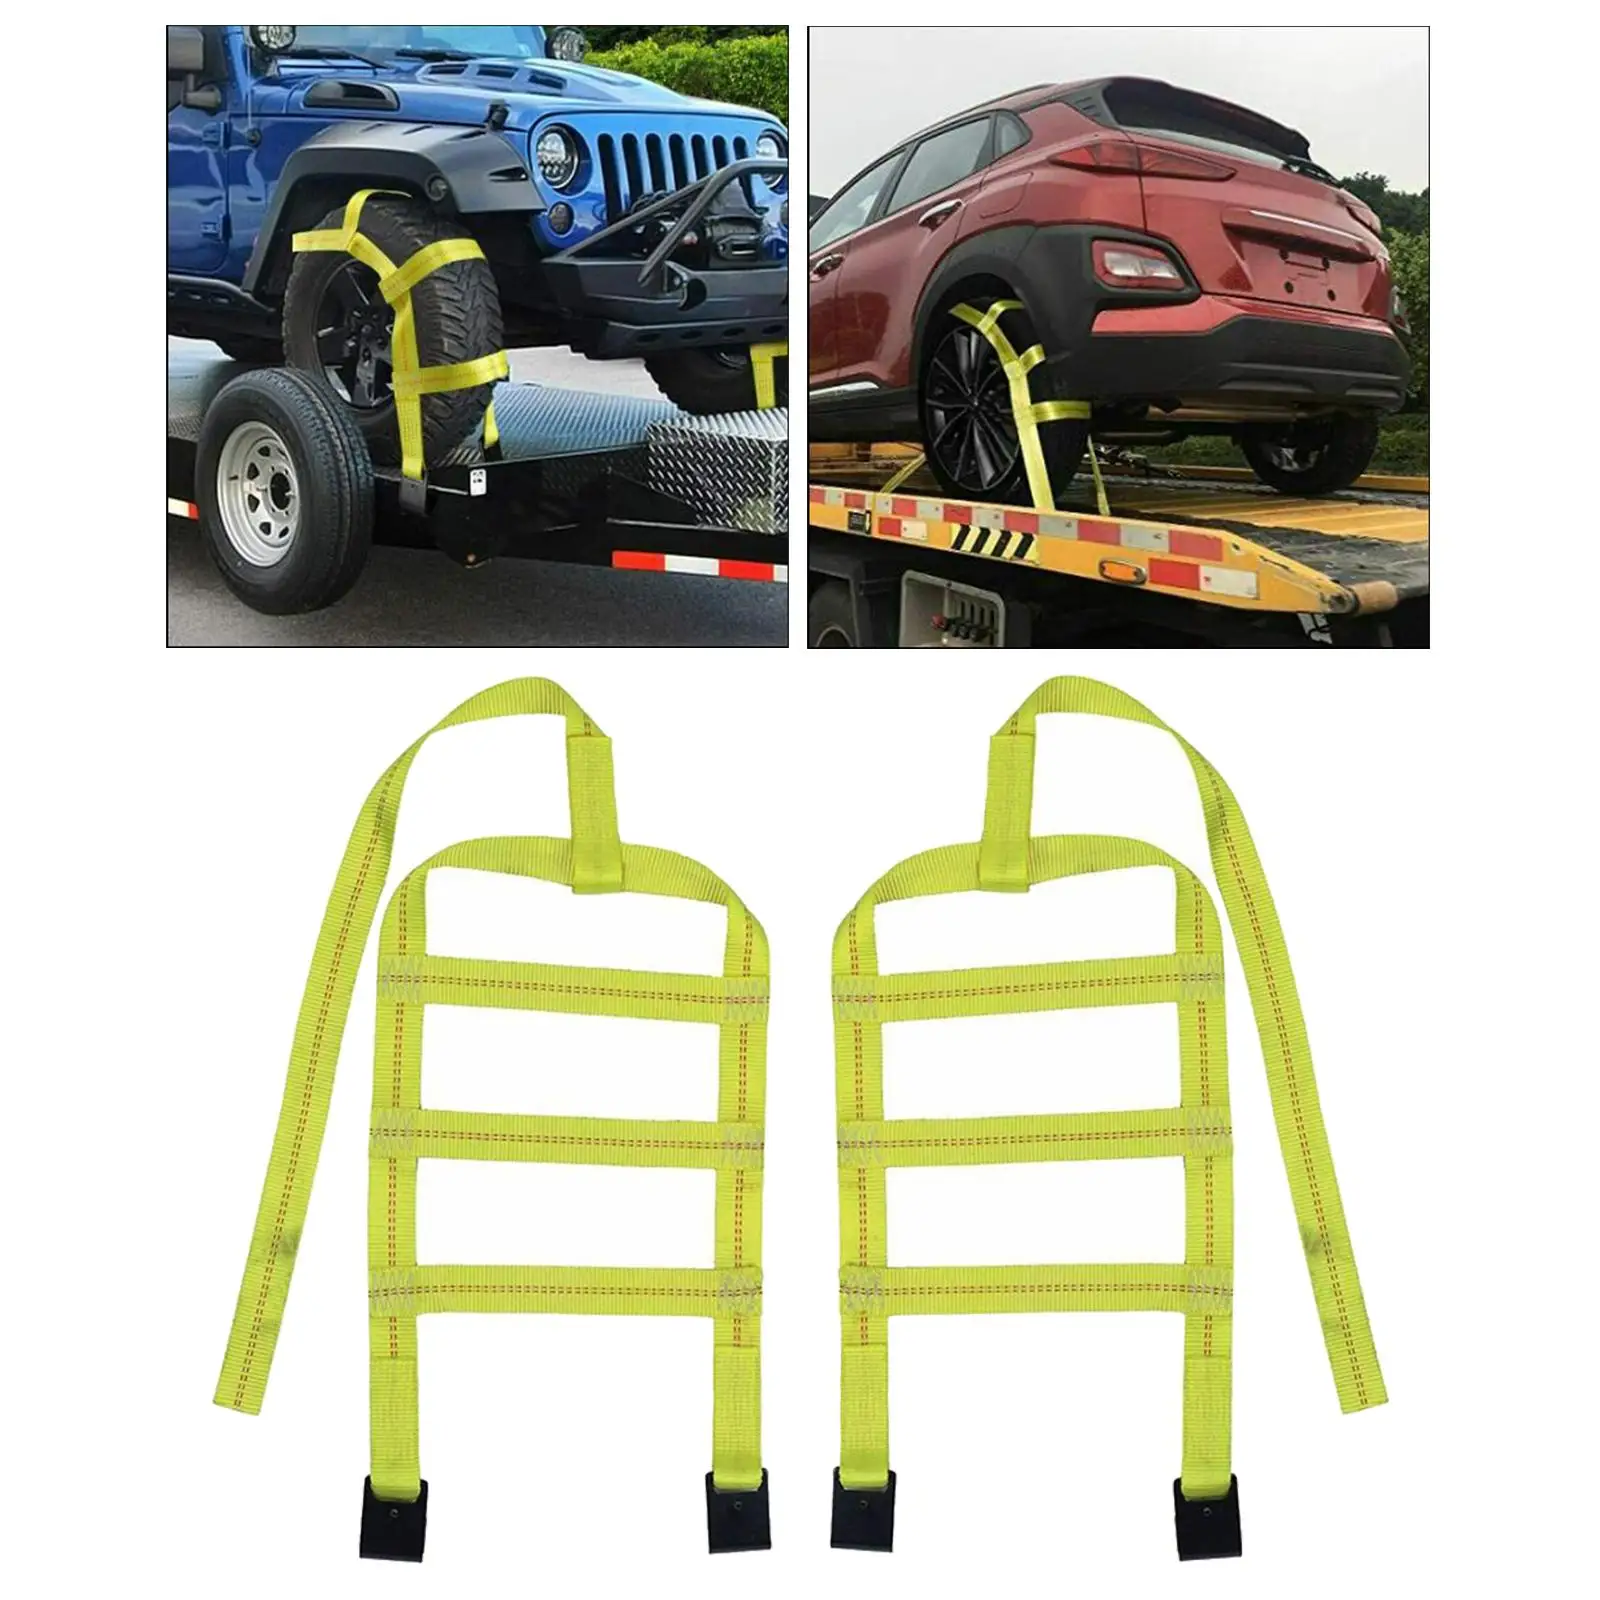 Tow Straps/ with Flat Hooks /Net Basket/ Heavy Duty /Adjustable/ Yellow/ Universal/ Car Basket Straps/ for 14-17inch Tires